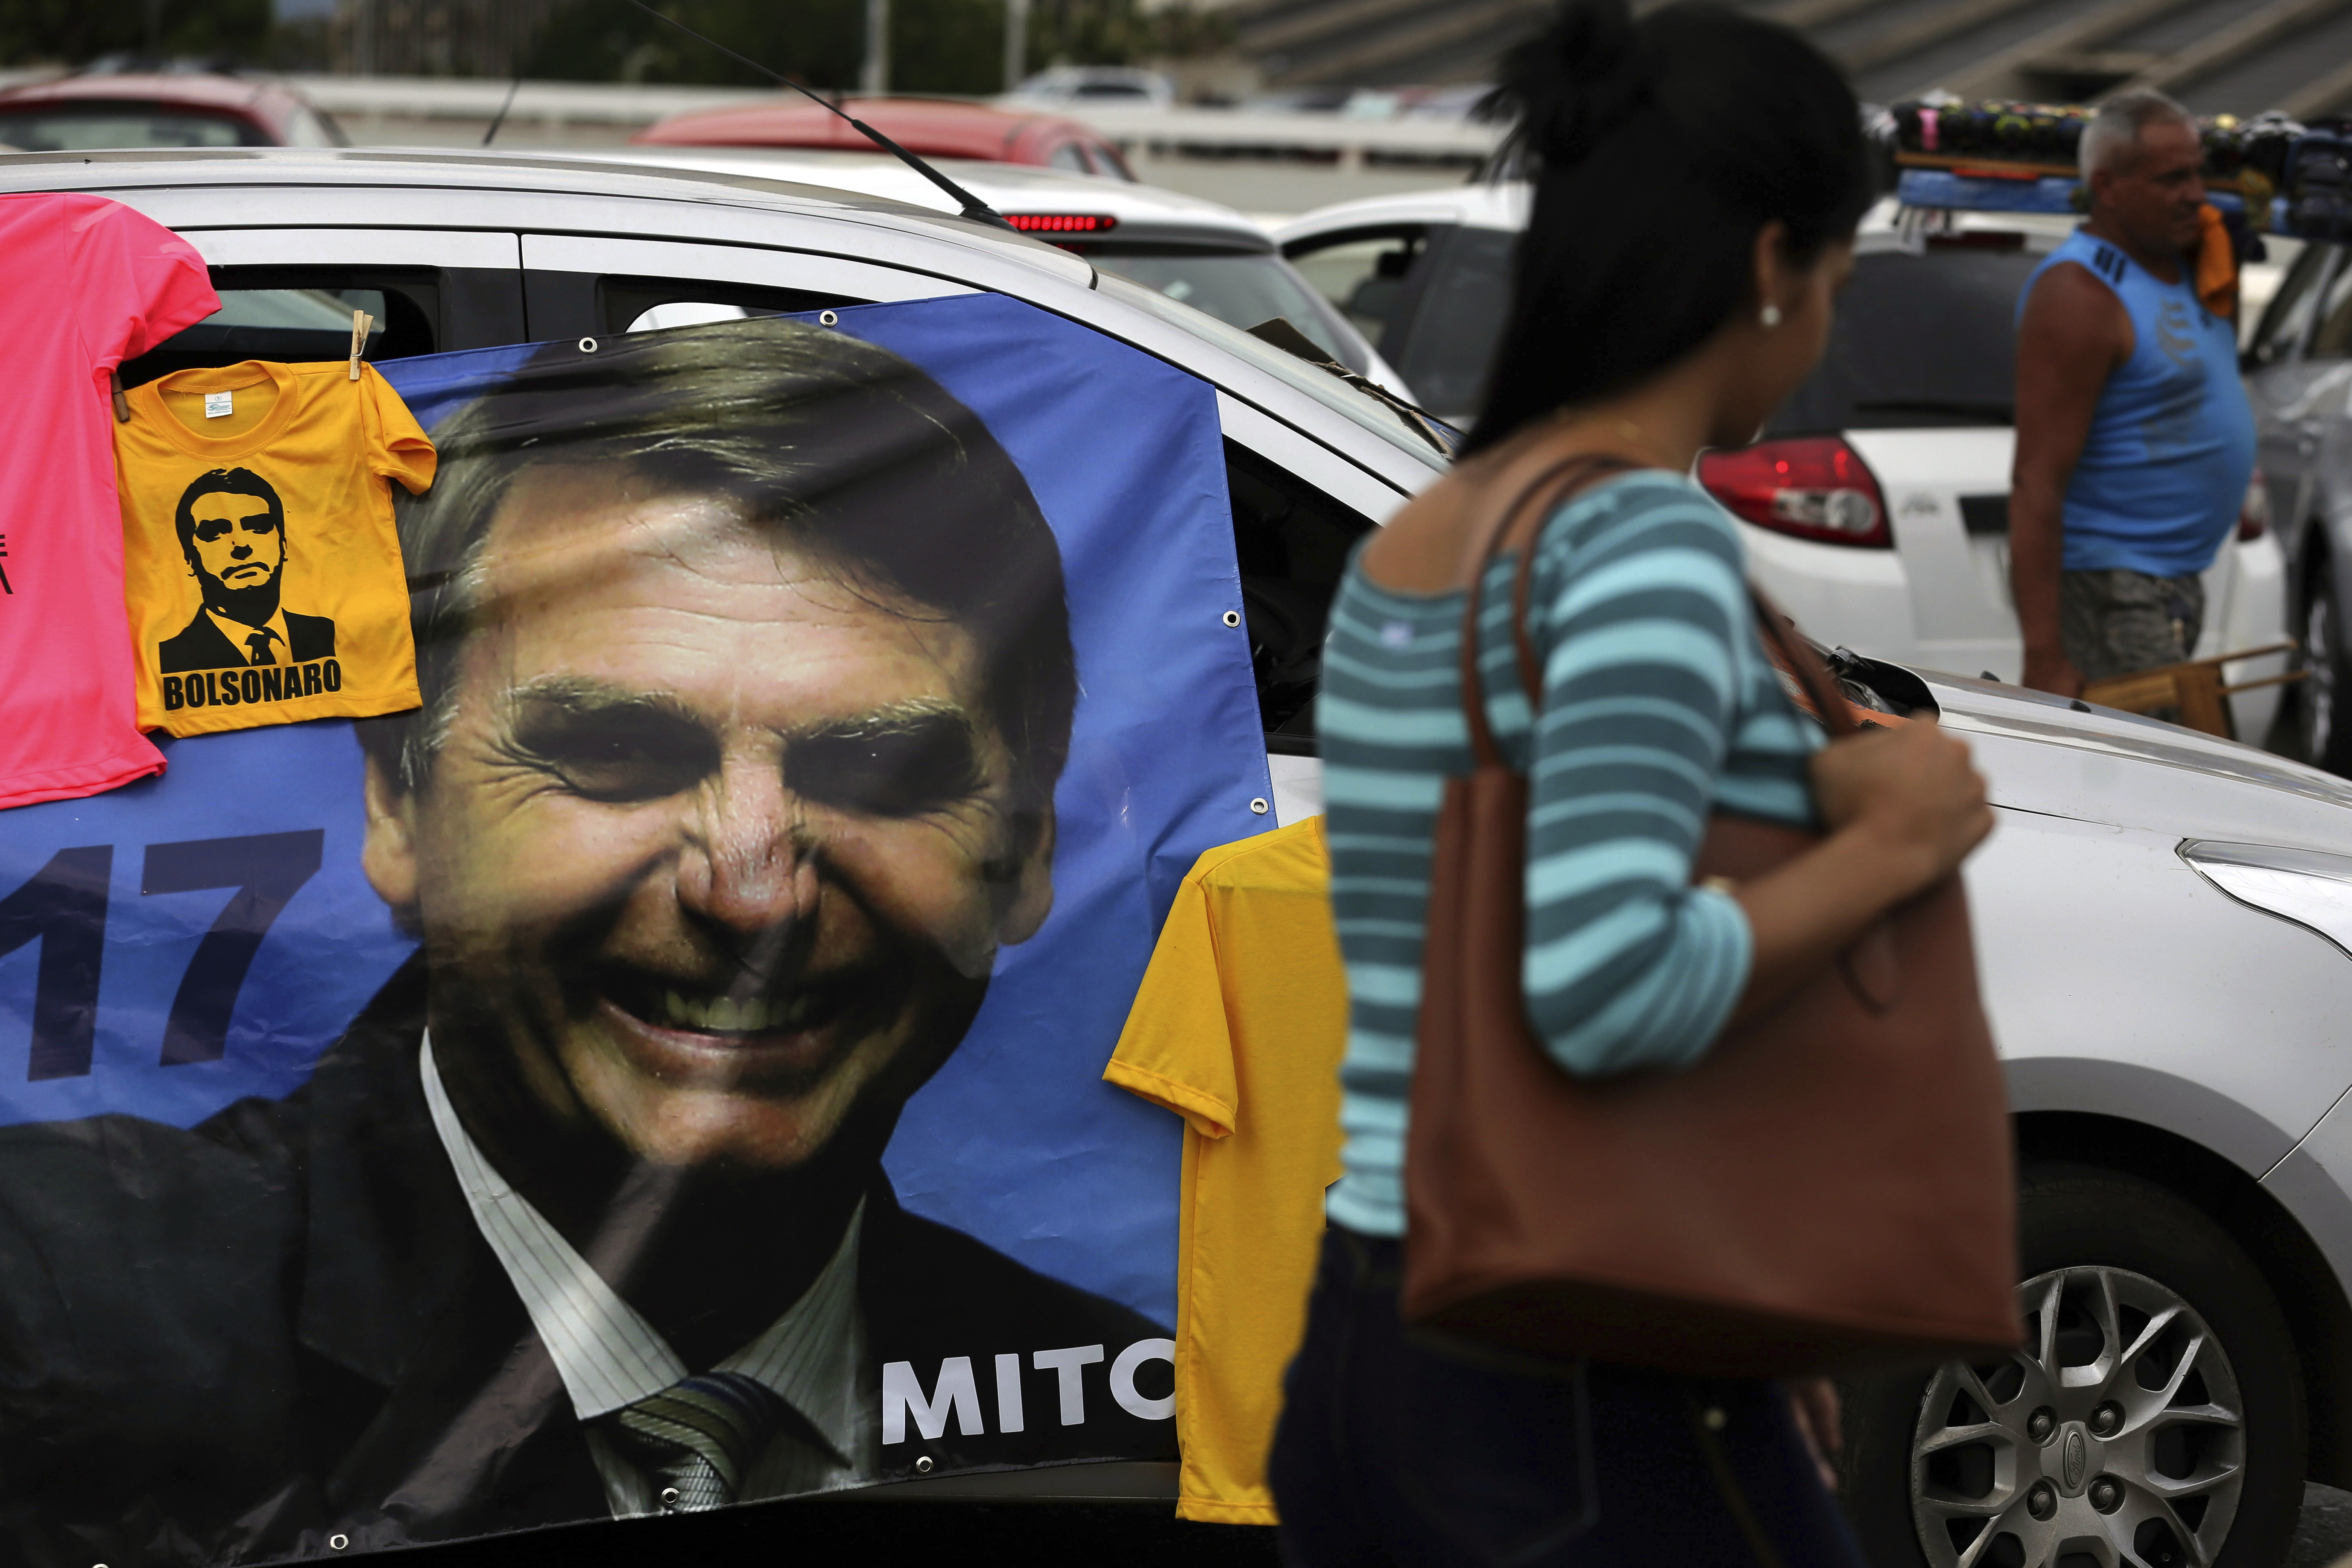 A supporter sells T-shirts with an image of right-wing presidential candidate Jair Bolsonaro, at a bus station in Brasília, Brazil, Wednesday, Oct. 17, 2018. Before the run-off election in Brazil on 28 October, right-wing populist presidential candidate Bolsonaro has a clear advantage over left-wing Workers' Party presidential candidate Fernando Haddad. (AP Photo/Eraldo Peres)